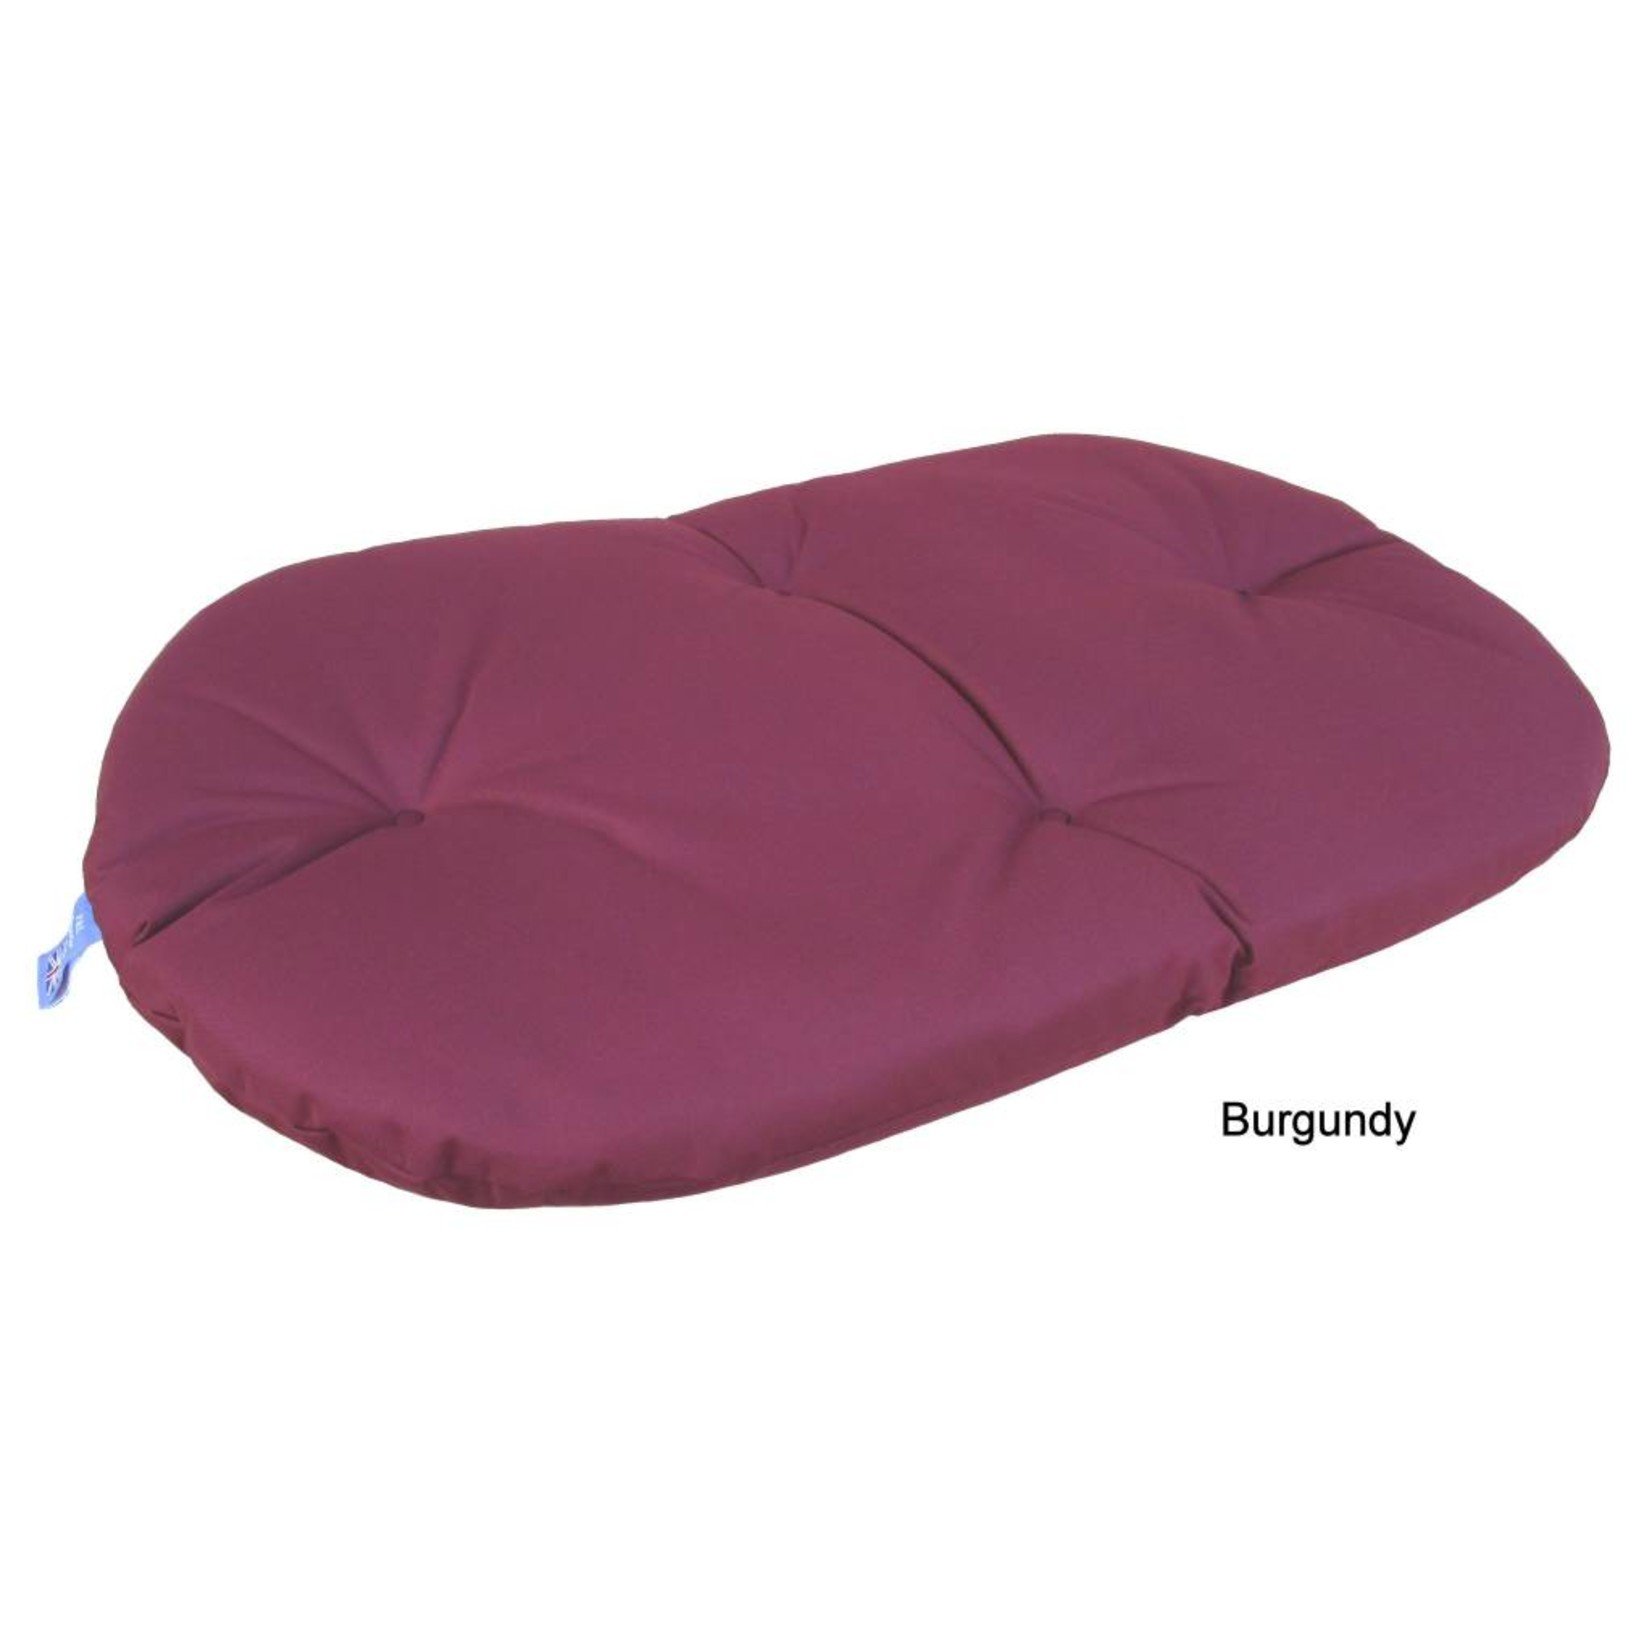 Pets & Leisure Country Dog Heavy Duty Oval Waterproof Cushion Pad in Burgundy